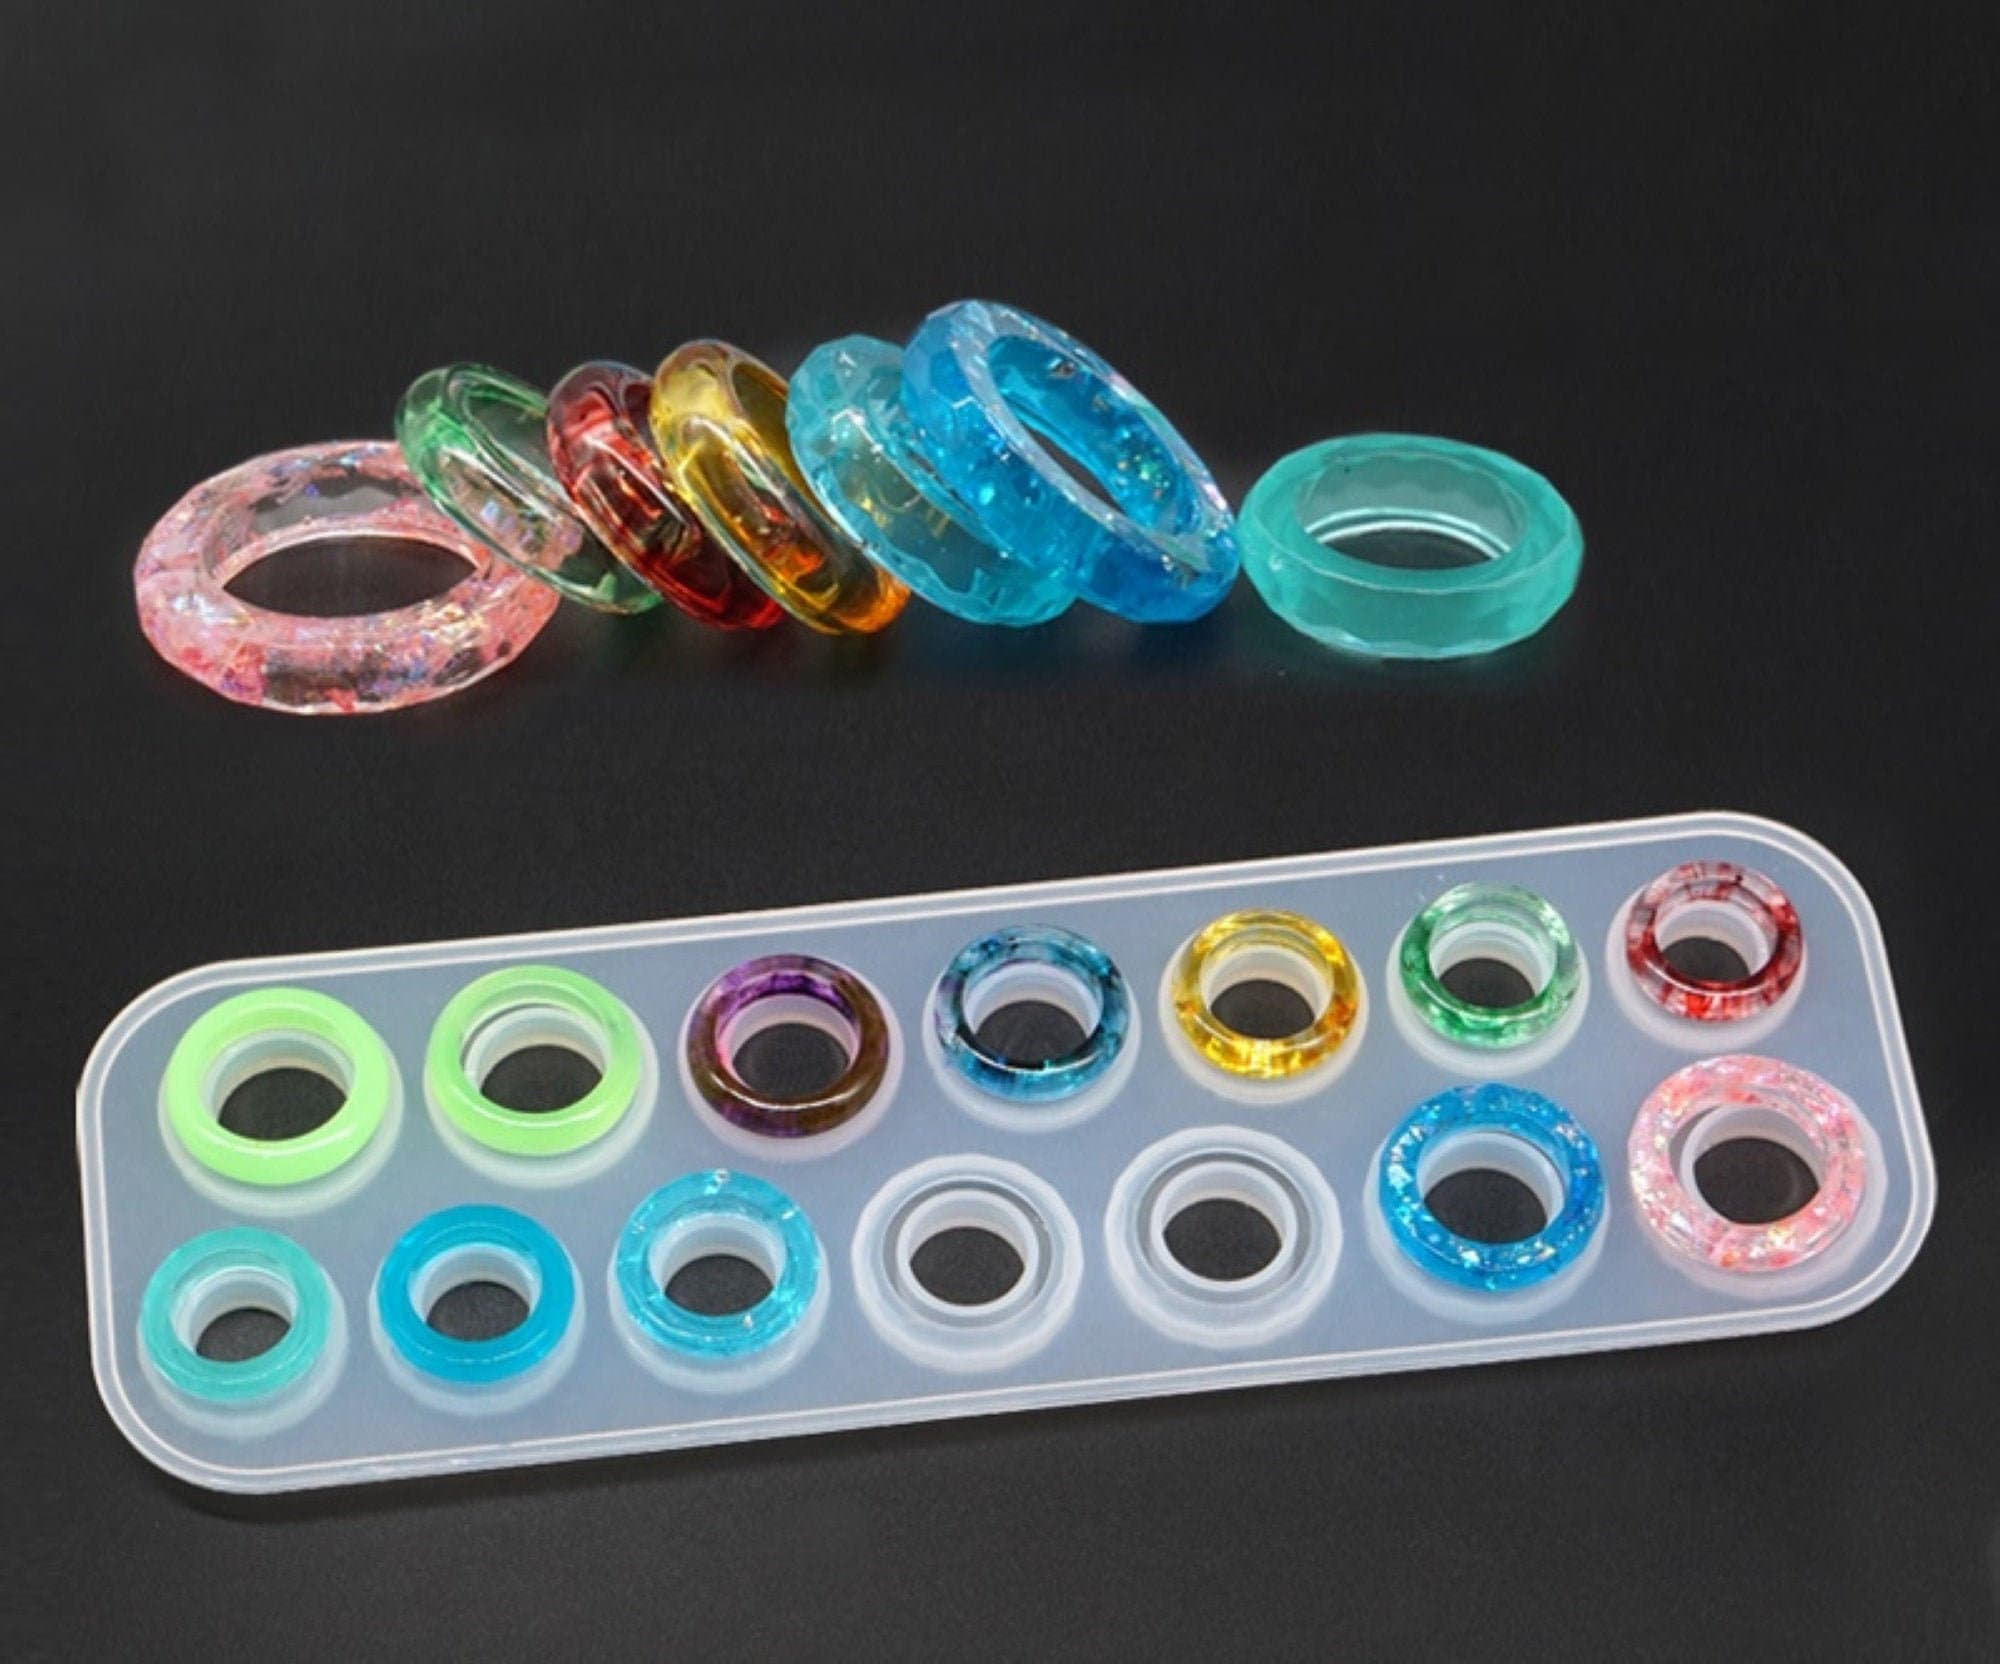 SIEYIO 3 Pcs Resin Casting Circle Jewelry Molds Resin Ring Mold Silicone  Jewelry DIY - Walmart.com